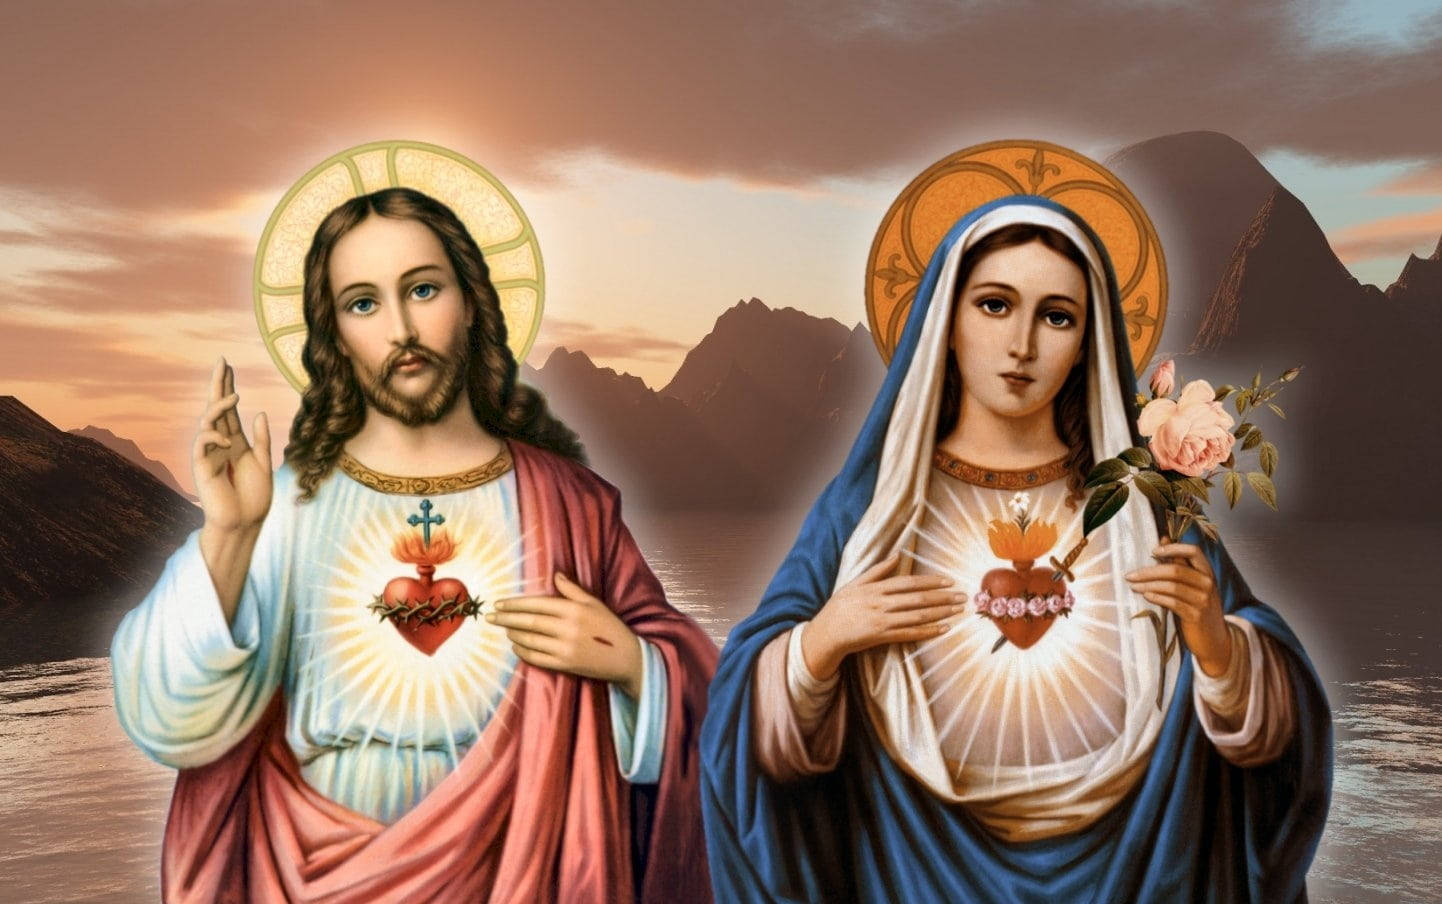 Free Mary And Jesus Wallpaper Downloads, Mary And Jesus Wallpaper for FREE